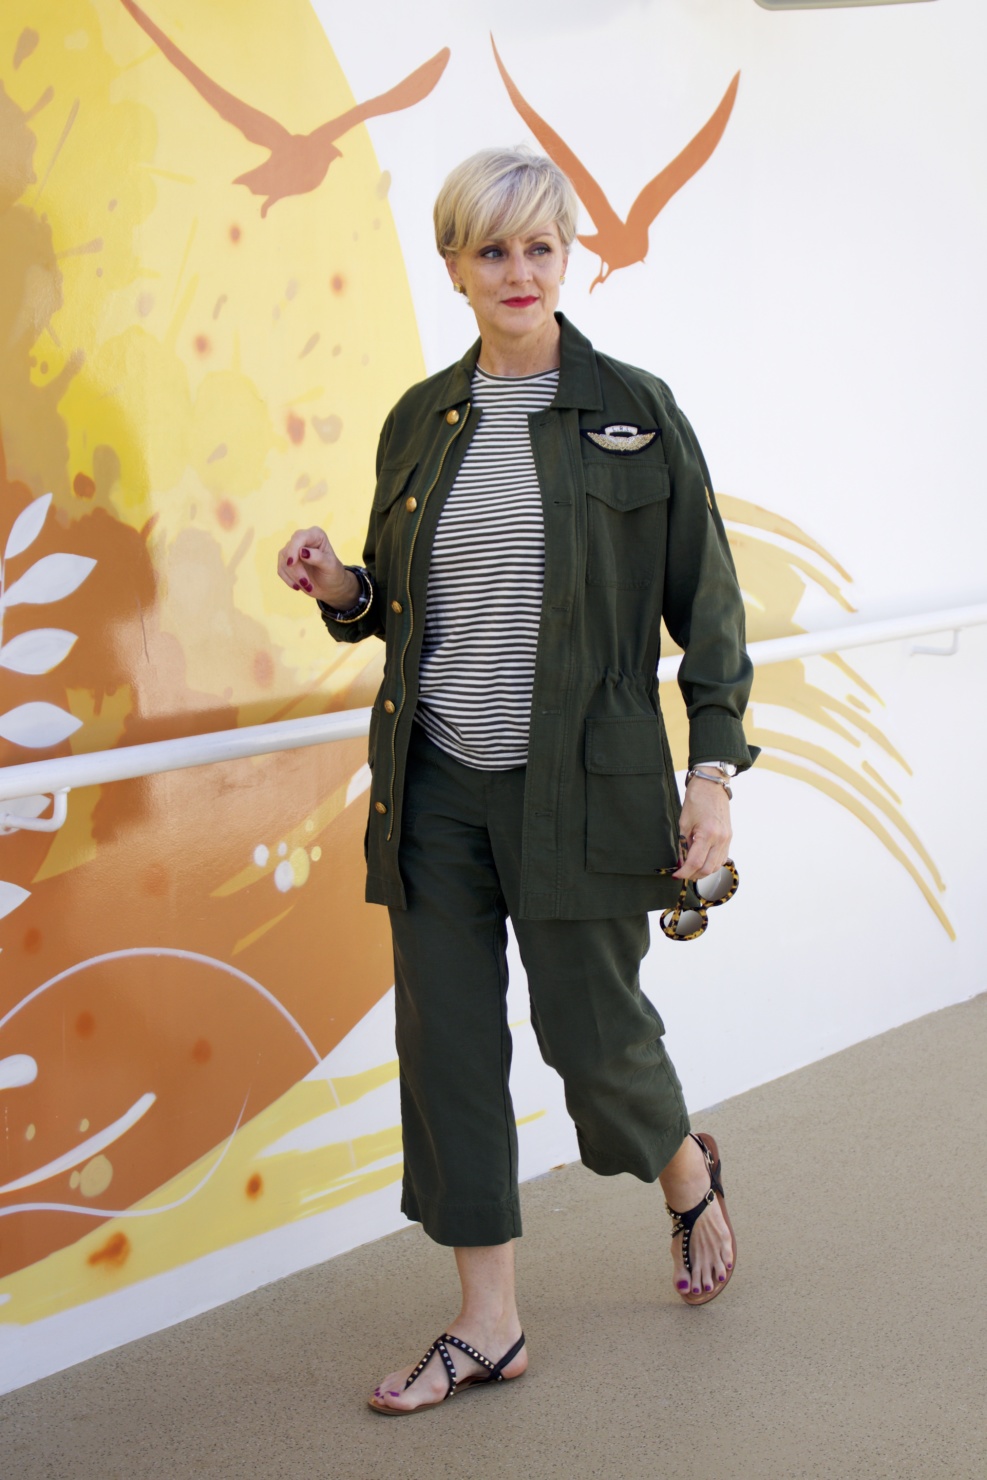 beth from Style at a Certain Age wears a Ralph Lauren military jacket, striped tee, and green cropped pants